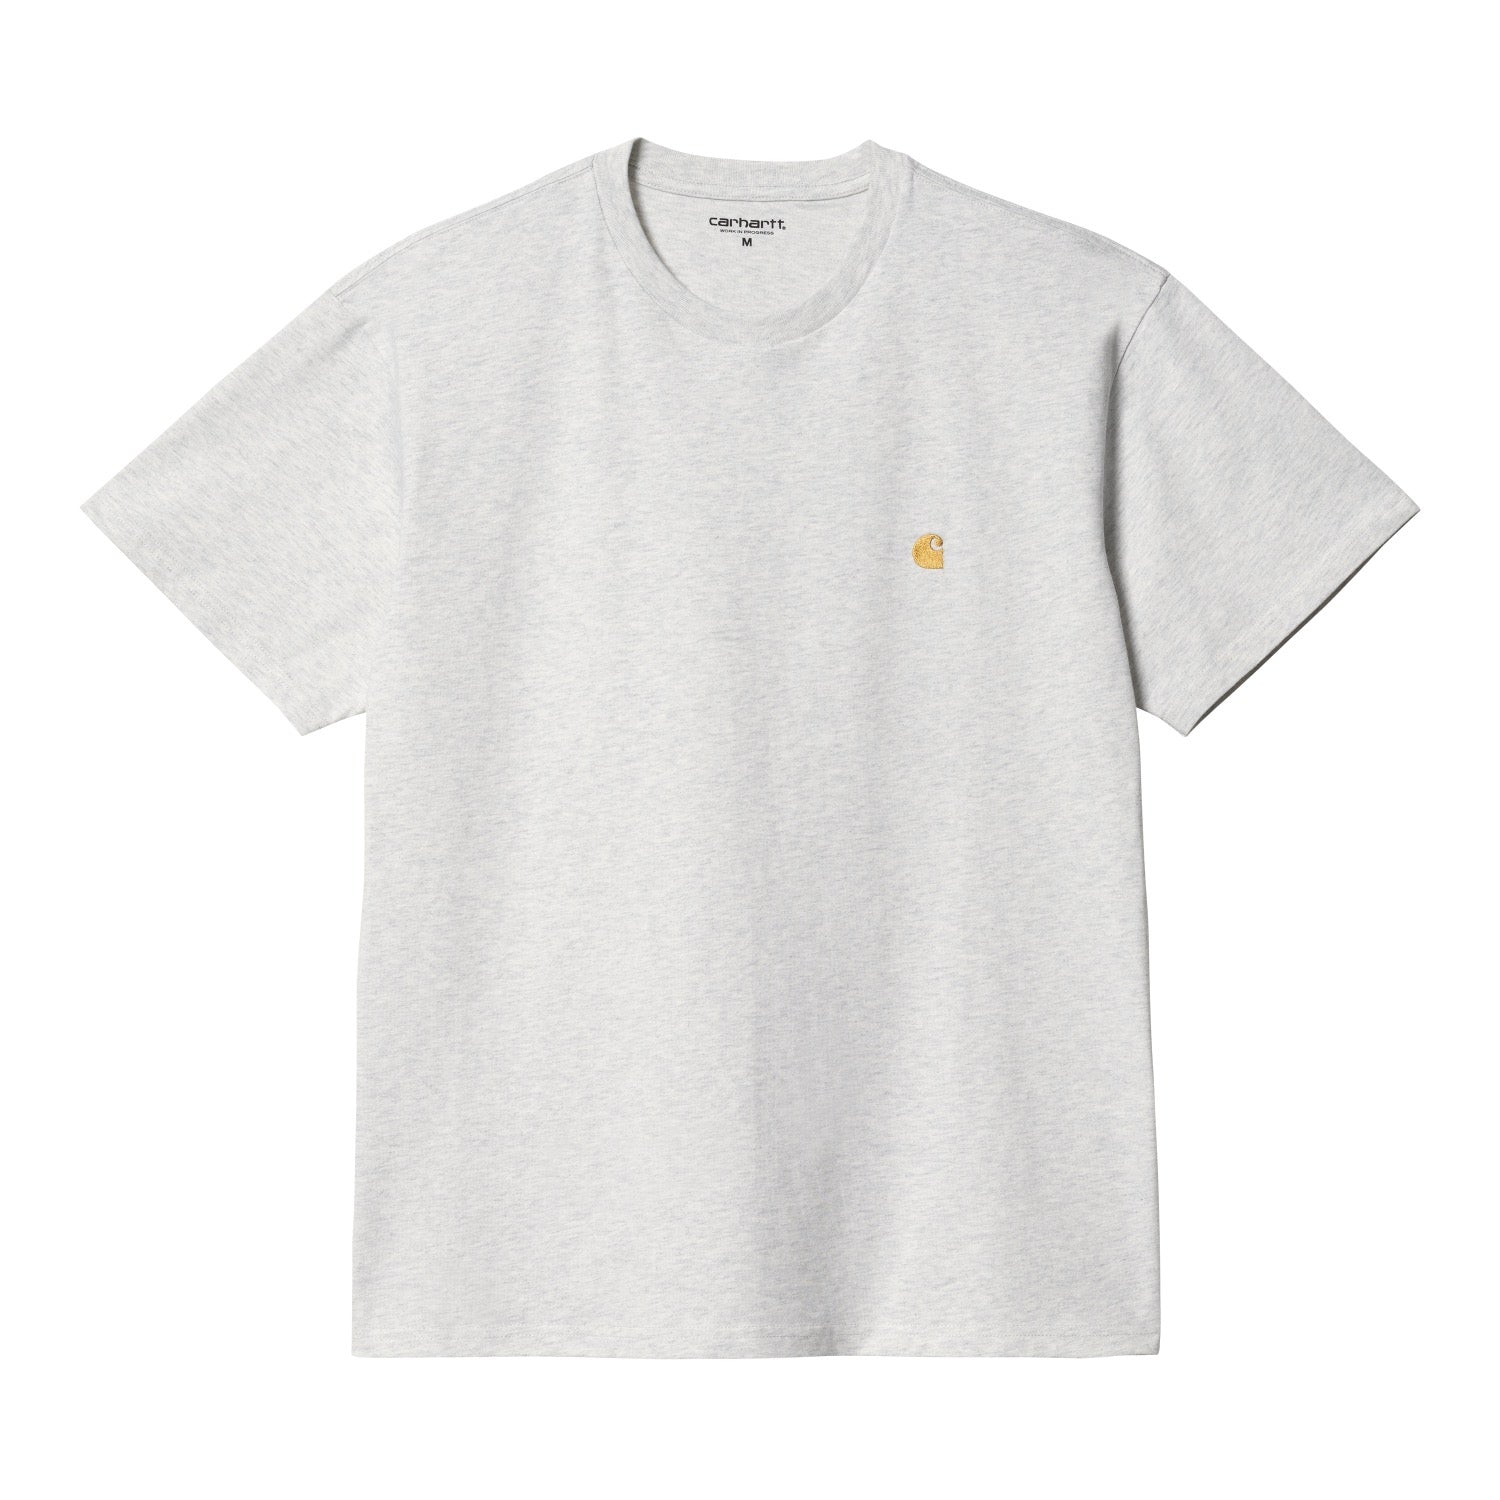 S/S CHASE T-SHIRT - Ash Heather / Gold